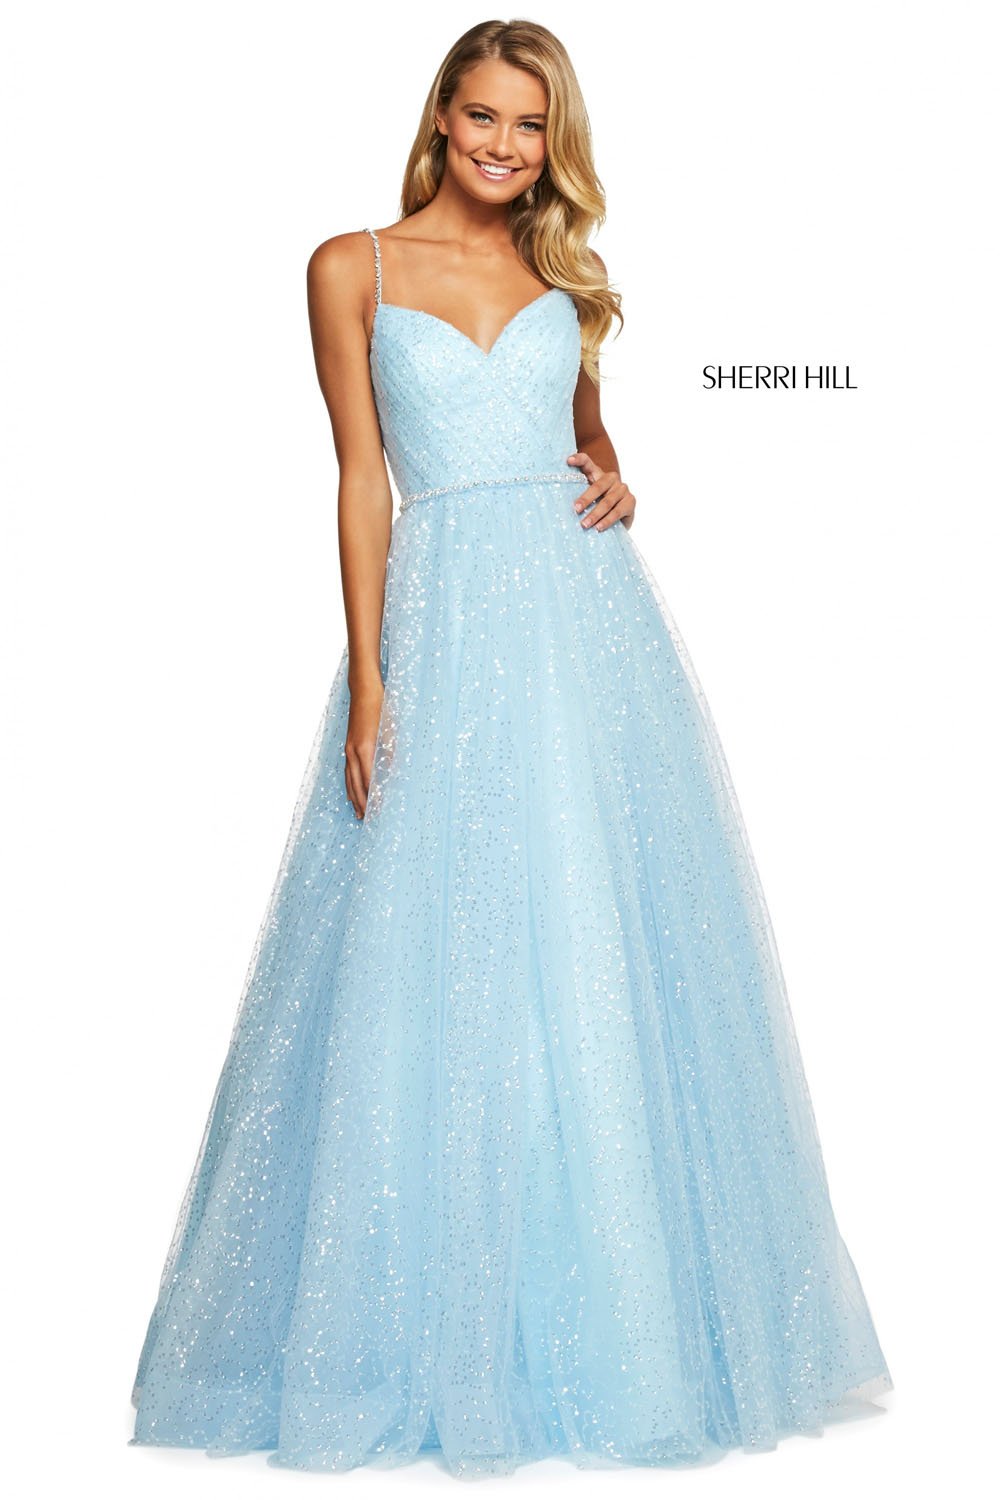 Sherri Hill 53637 dress images in these colors: Ivory, Blush, Yellow, Light Blue, Lilac.